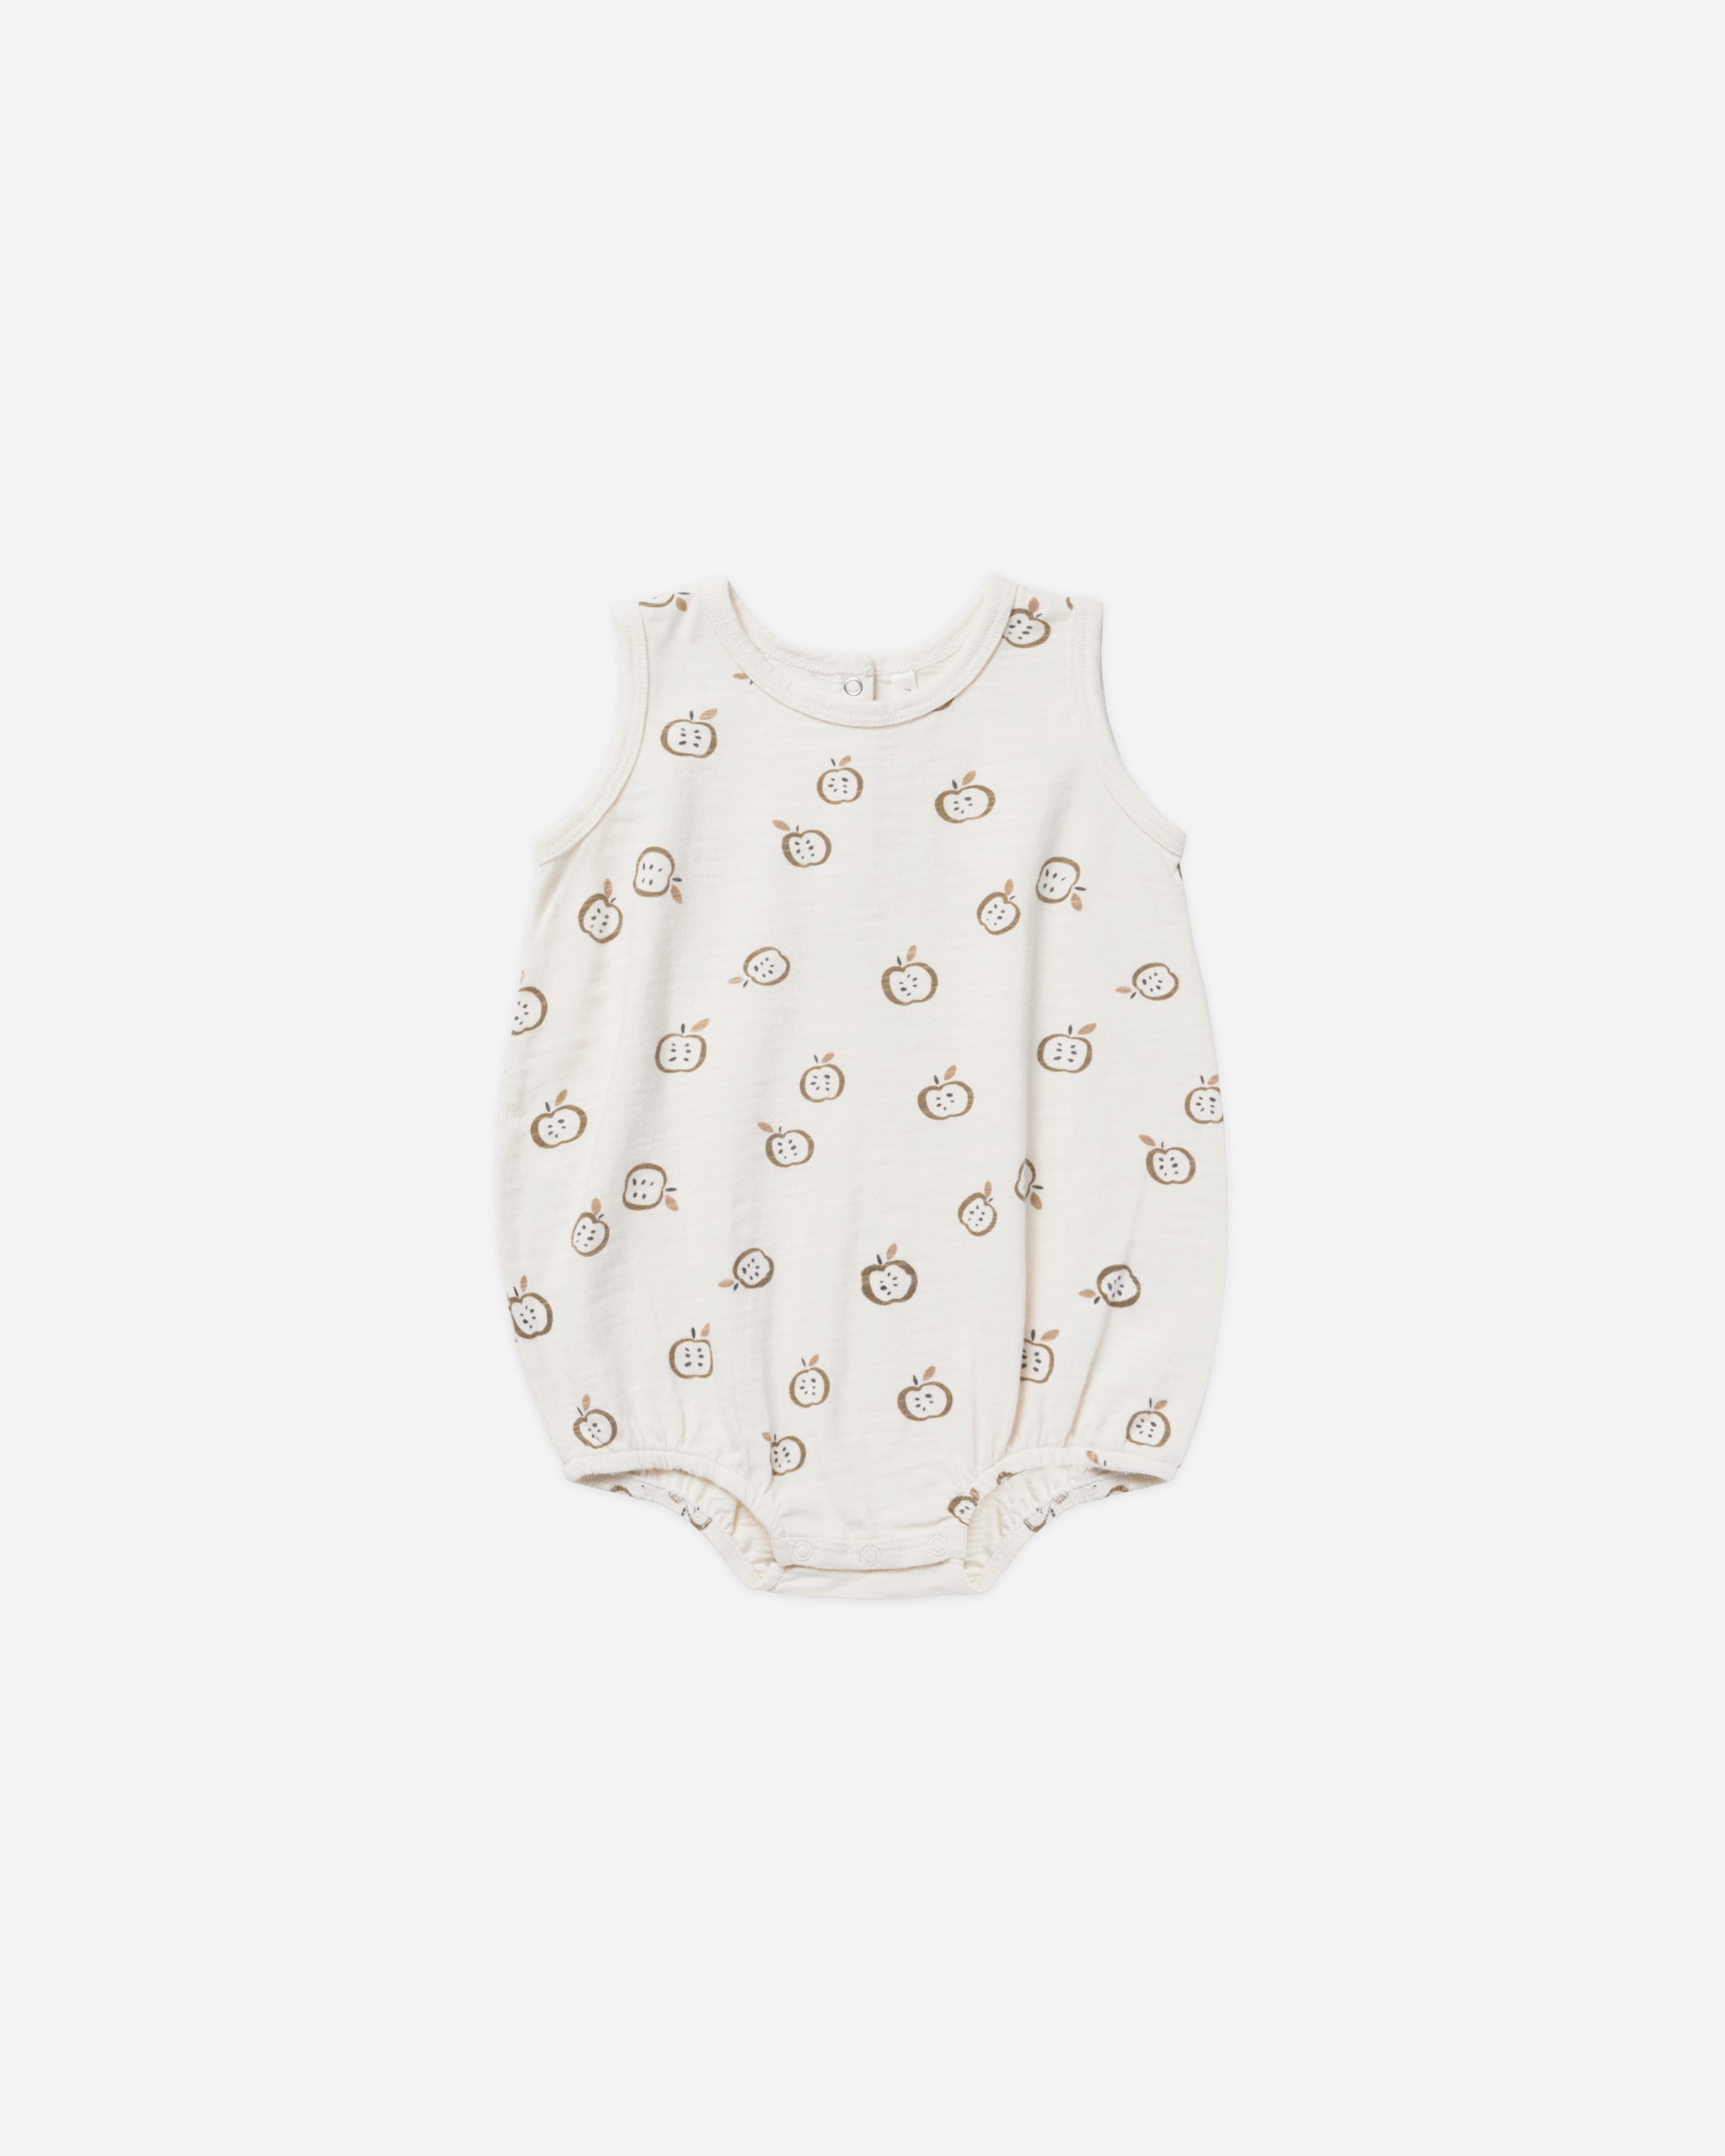 Bubble Onesie || Apples - Rylee + Cru | Kids Clothes | Trendy Baby Clothes | Modern Infant Outfits |